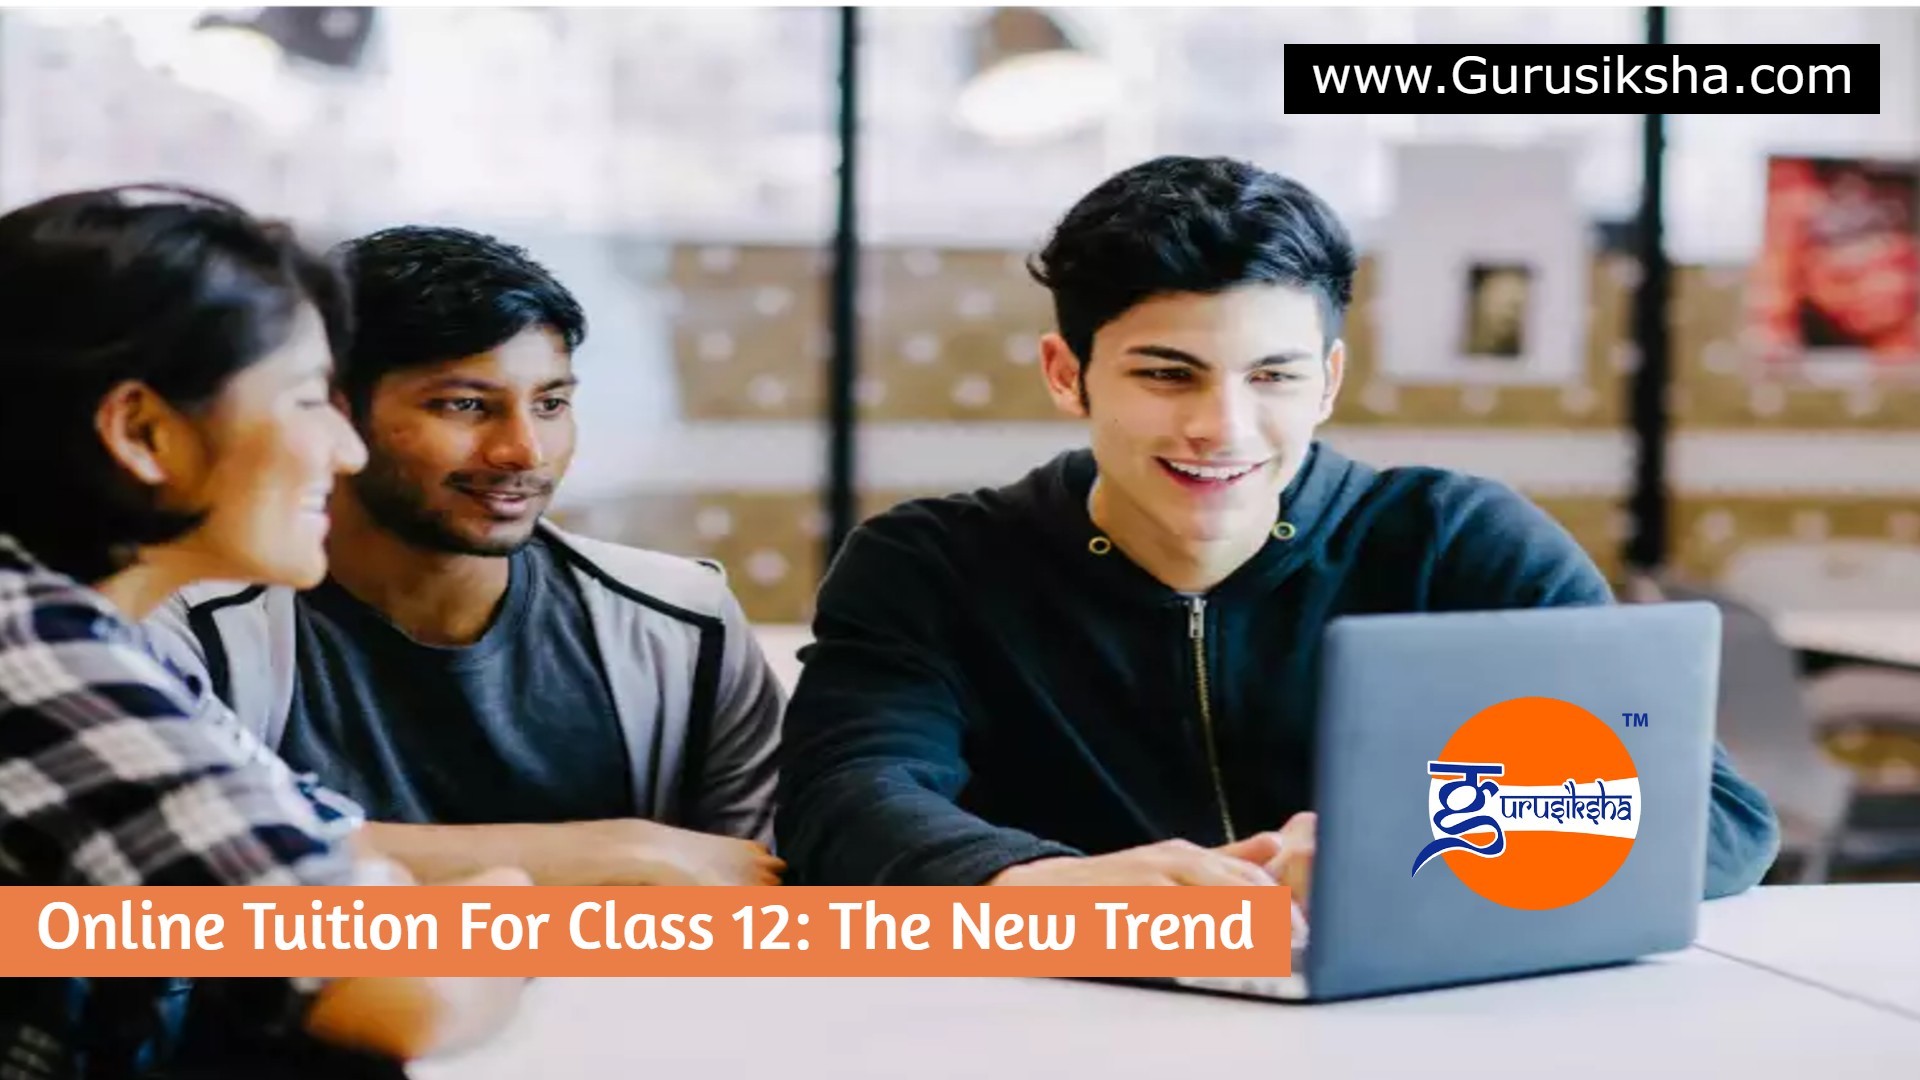 Online Tuition For Class 12: The New Trend